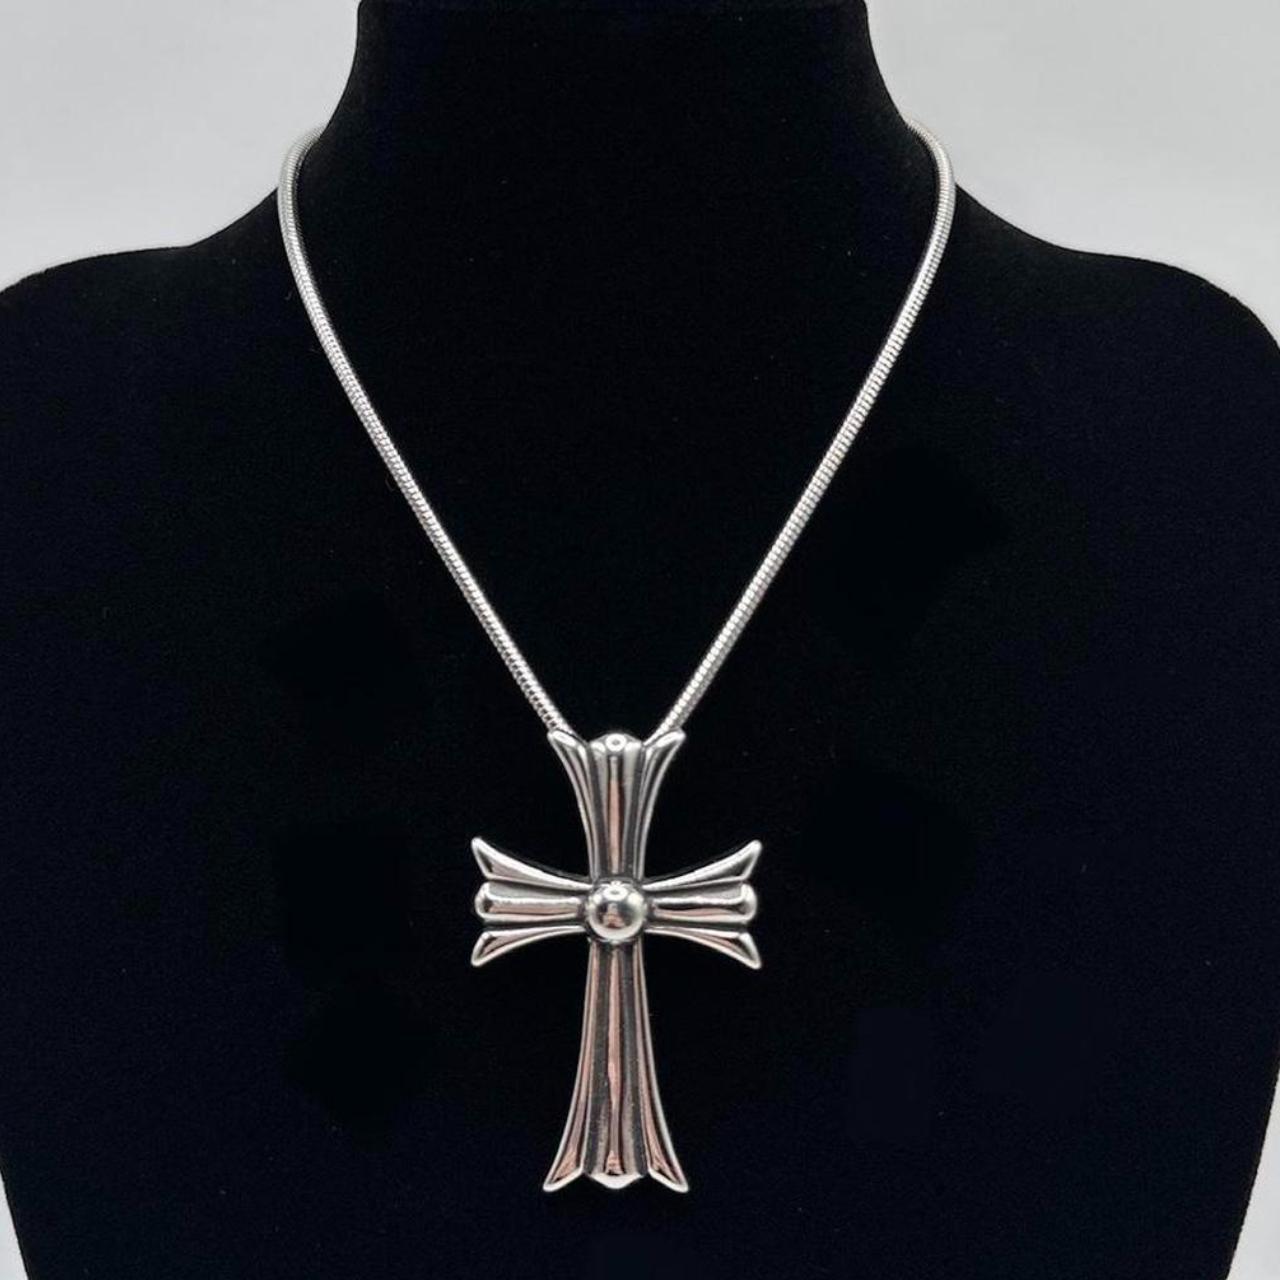 Extremely High Quality Stainless Steel Cross... - Depop